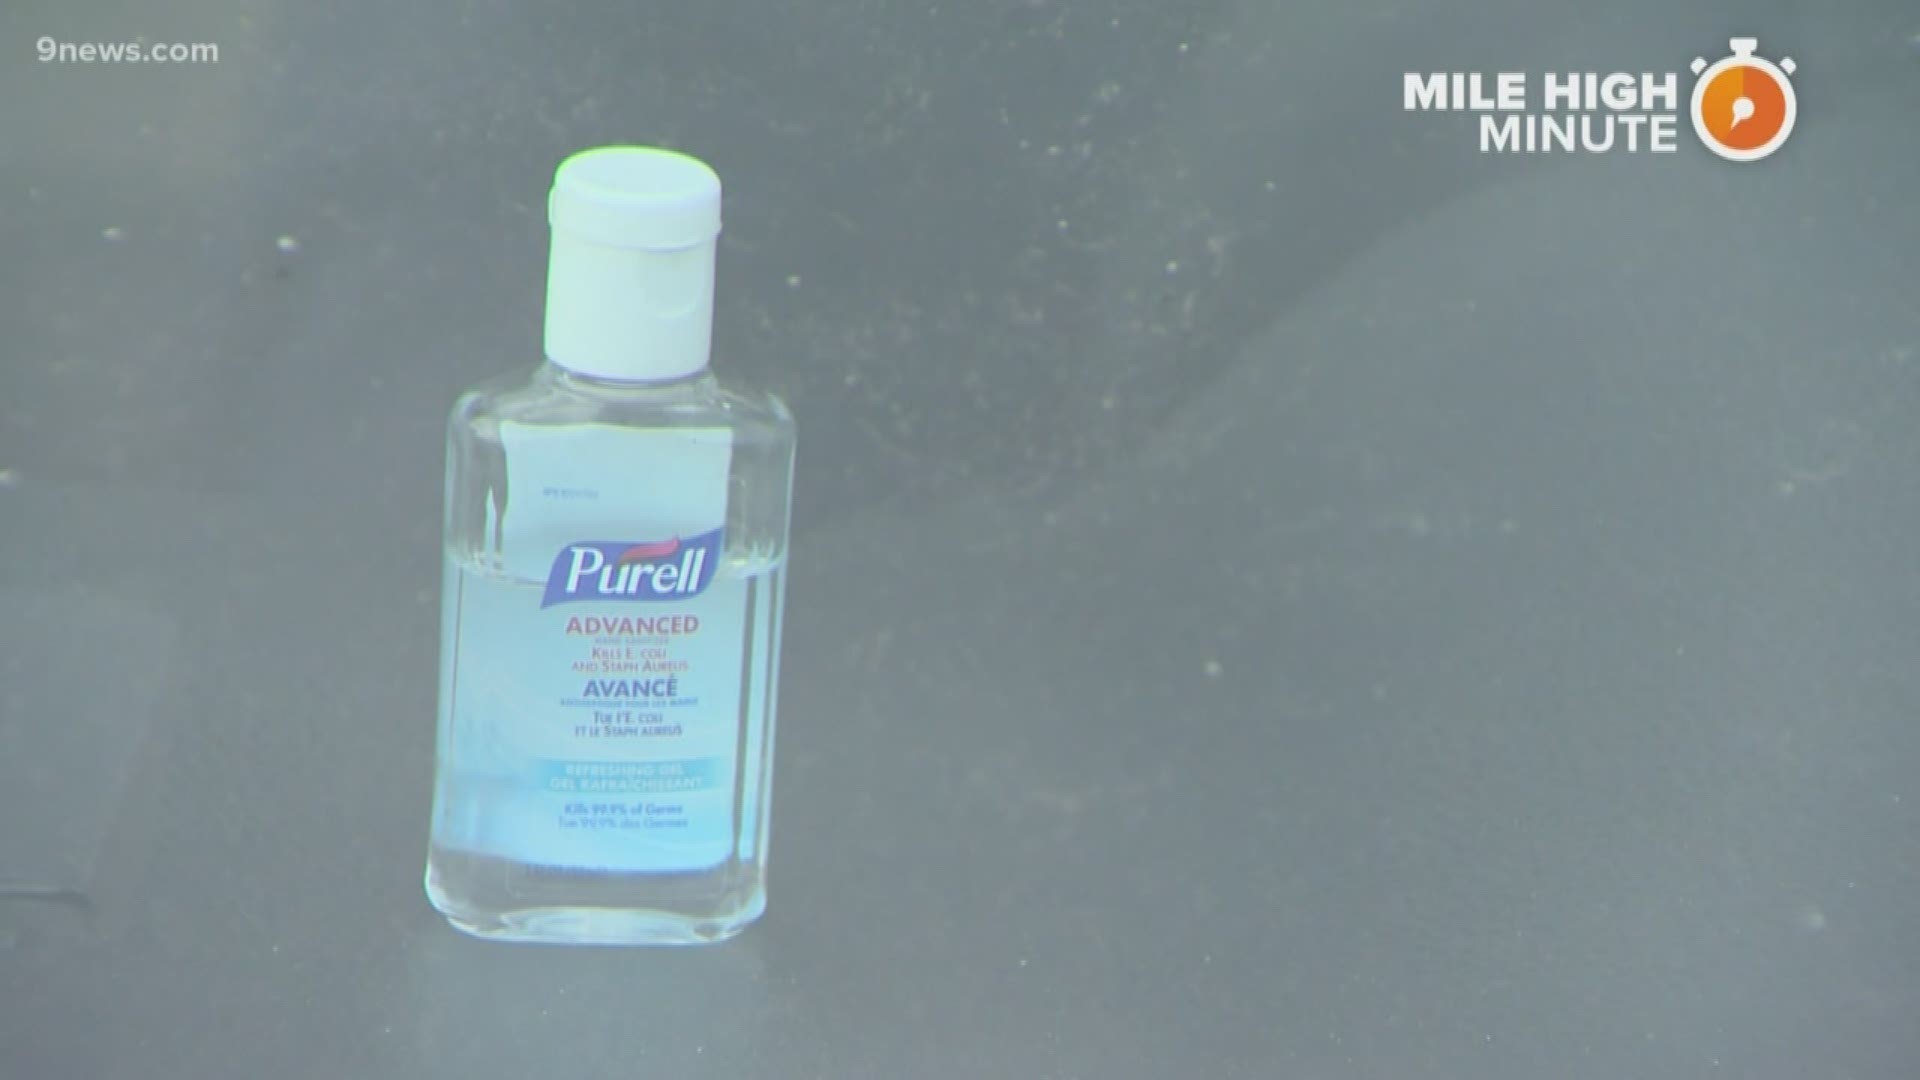 In this week's Mile High Minute, we have tips on how to clean your car to reduce the risk of spreading COVID-19.